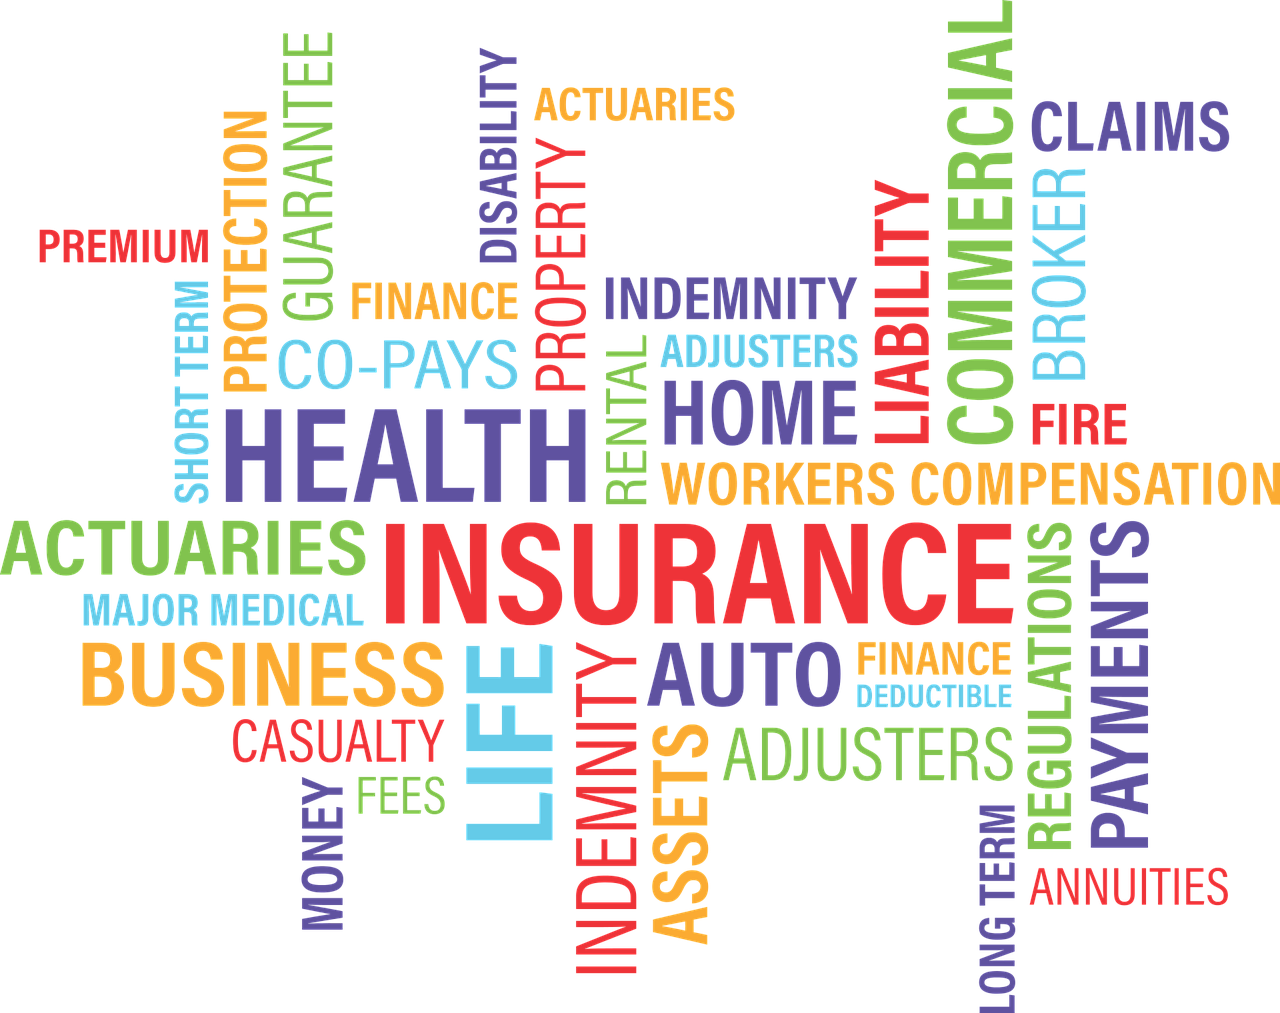 Auto and Home Insurance